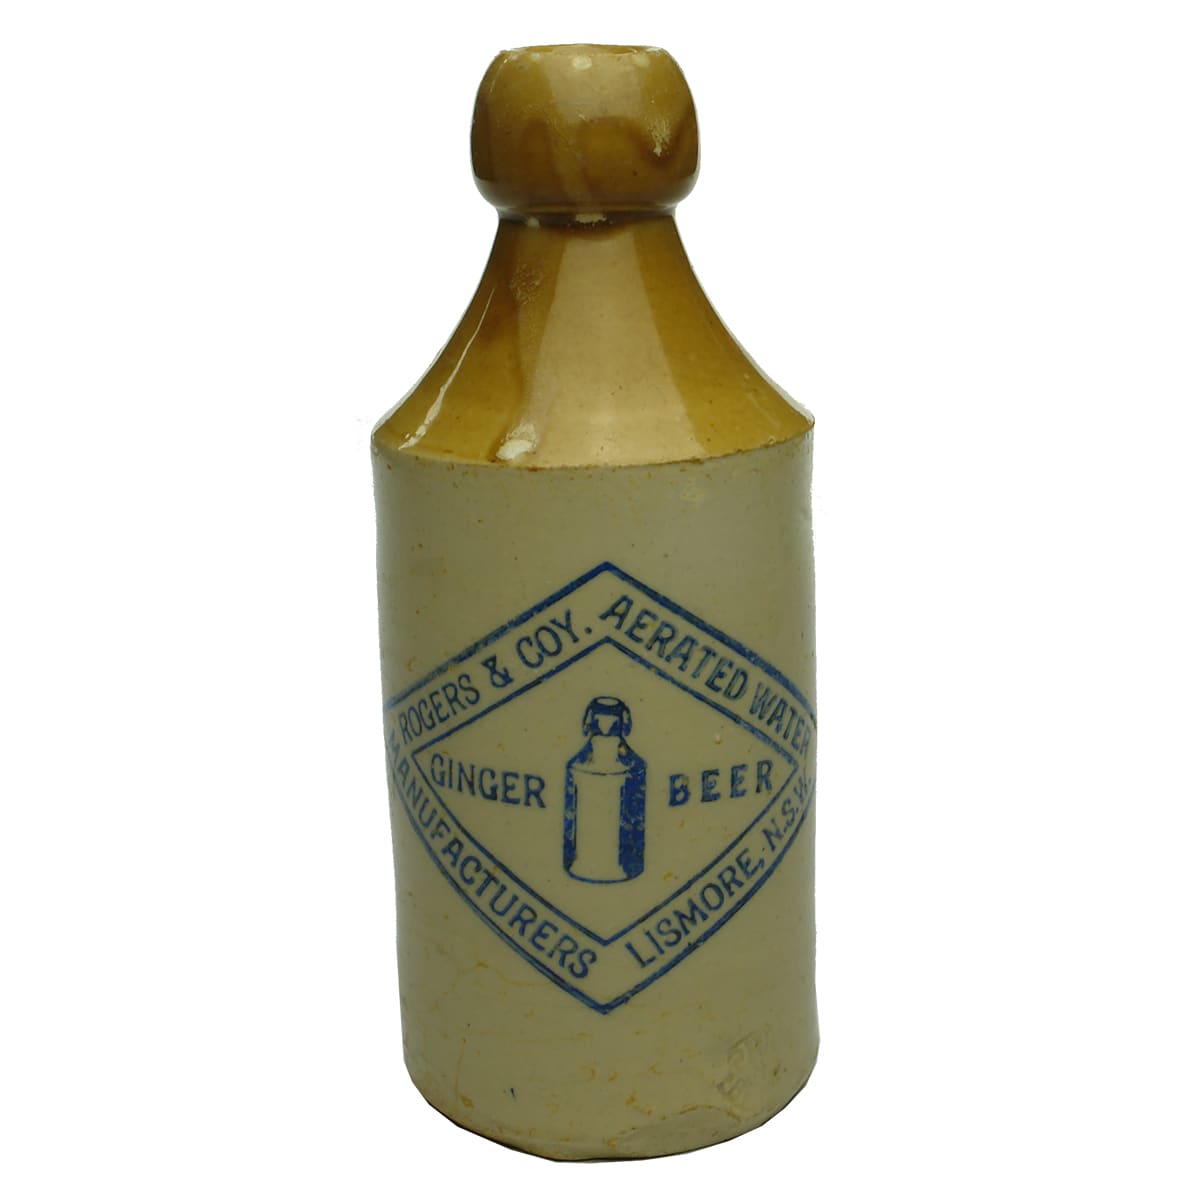 Ginger Beer. Rogers & Co., Lismore. Dump. Blue Print. Tan Top. (New South Wales)